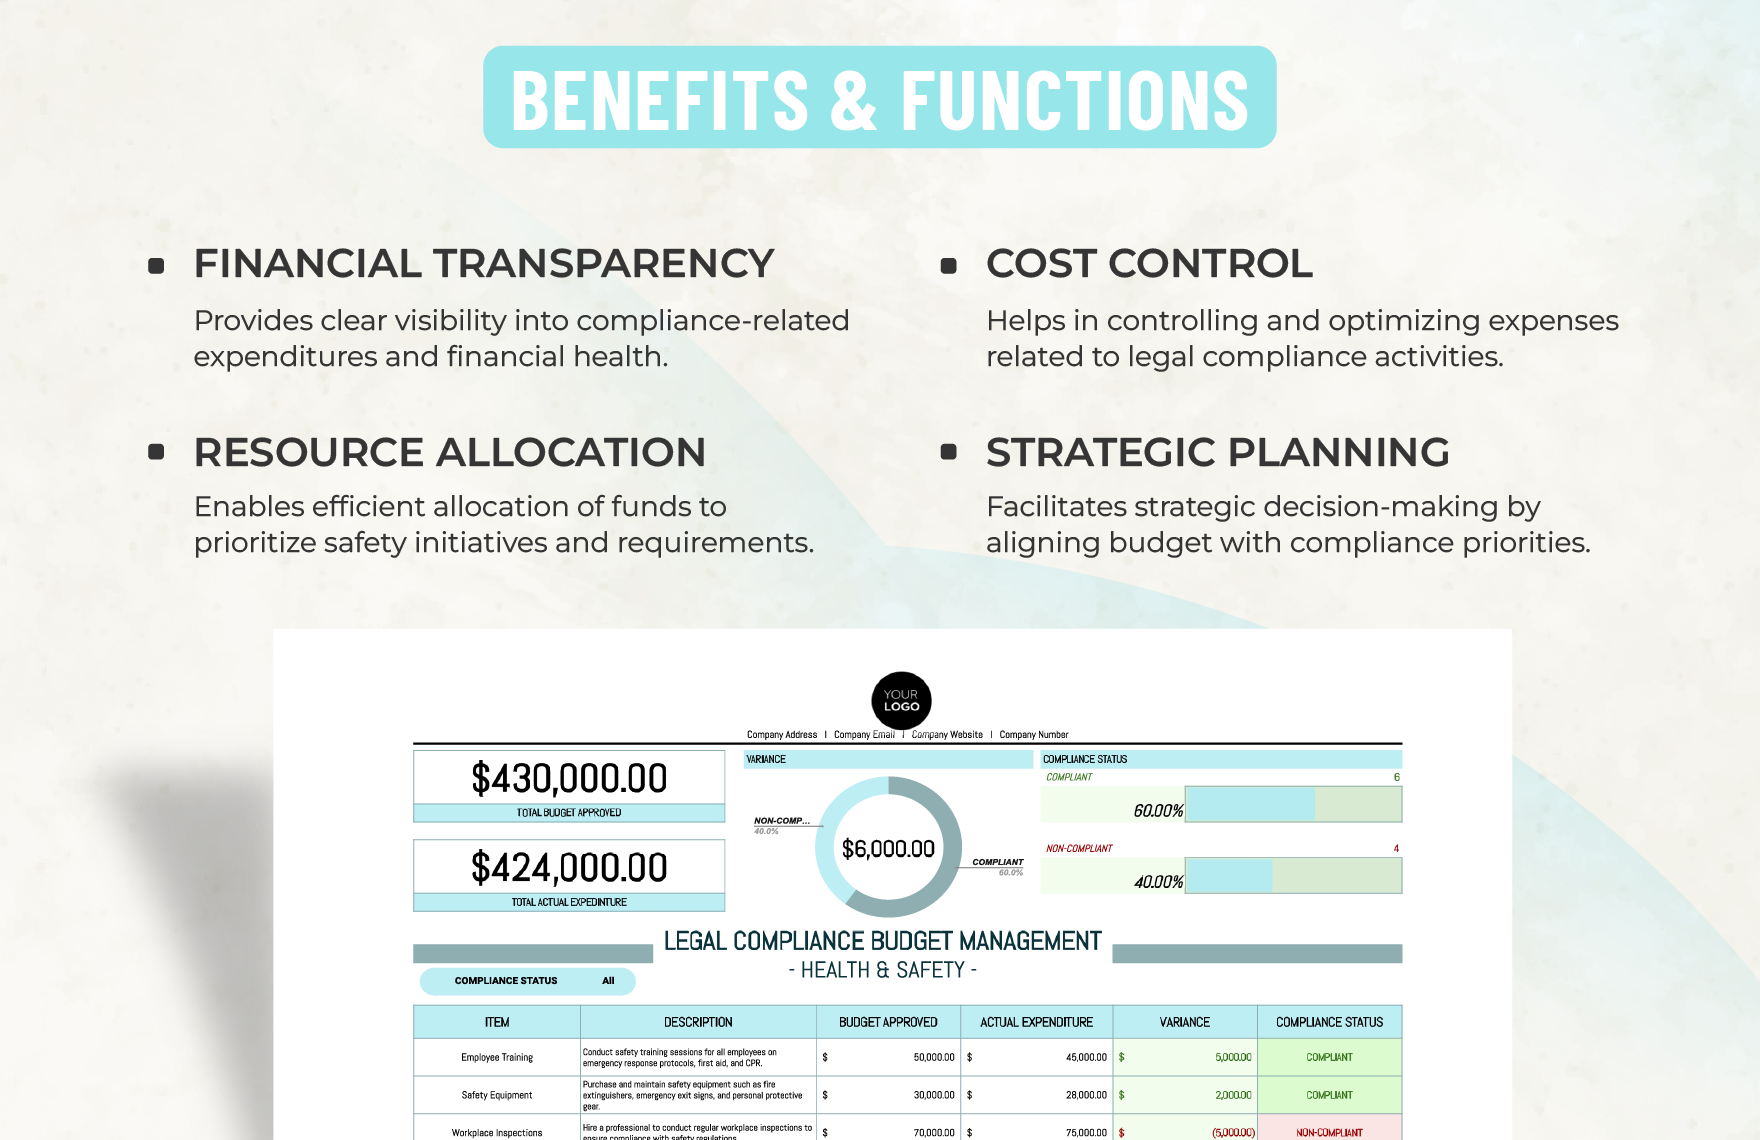 Health & Safety Legal Compliance Budget Management Sheet Template